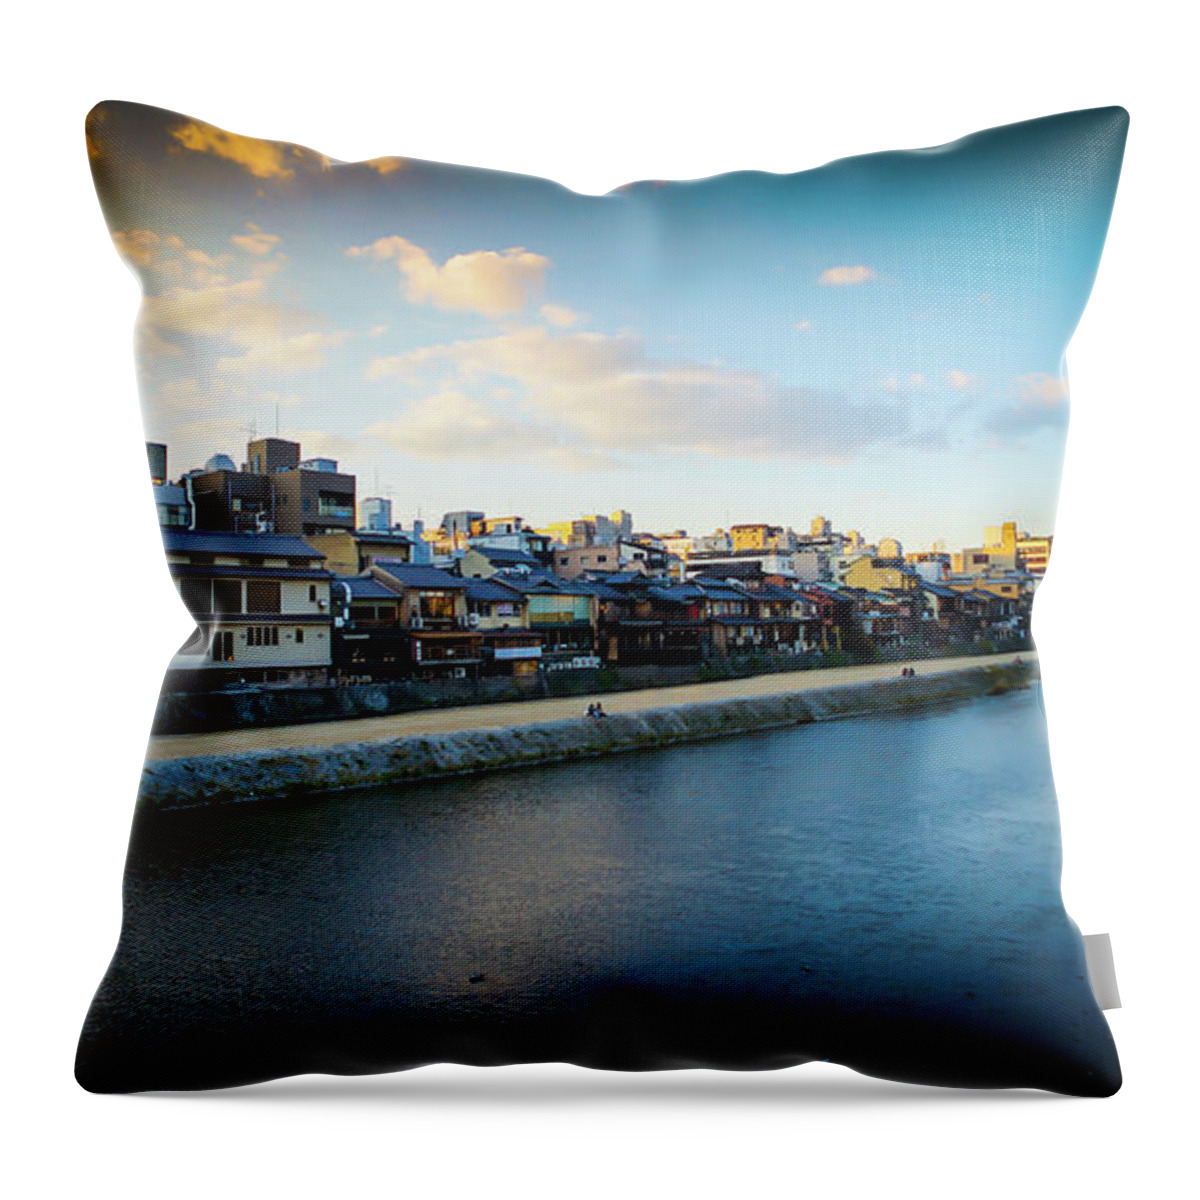 Tranquility Throw Pillow featuring the photograph Kamo River, Kyoto by =tengnkoh@photography=